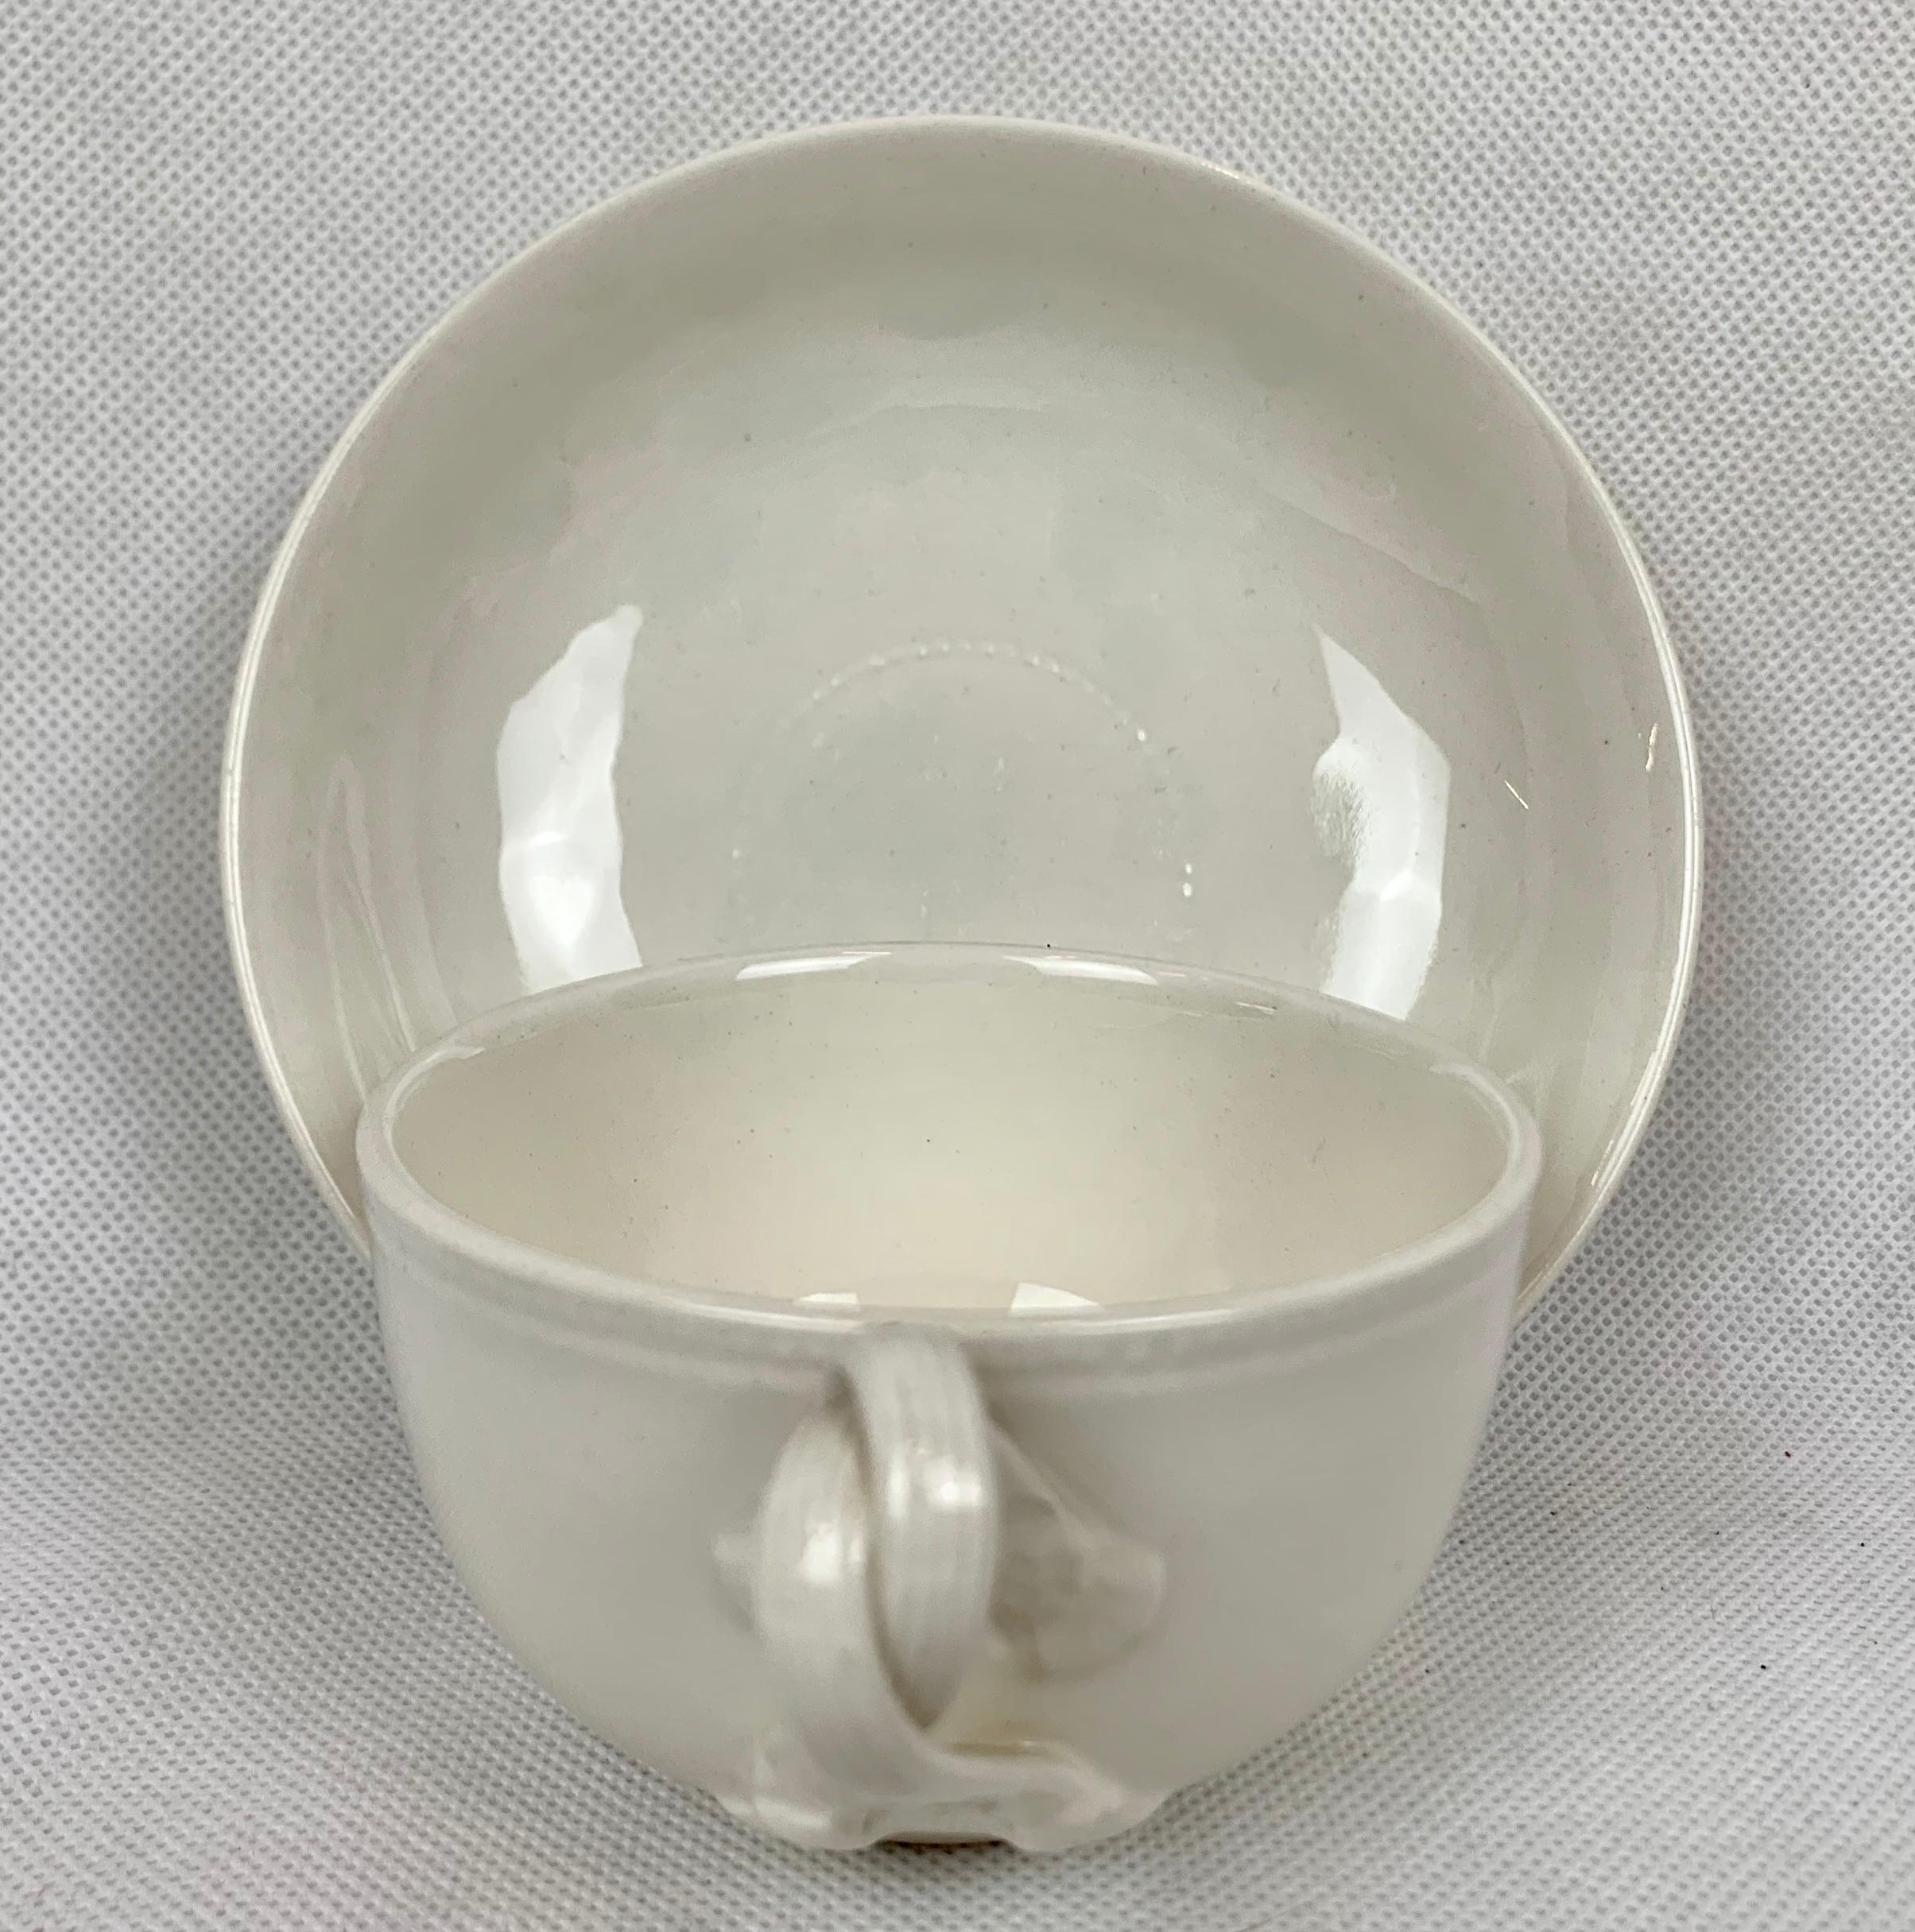 Georgian Authentic Leedsware Cups and Saucers with Double Strap Handles-Set of Six 